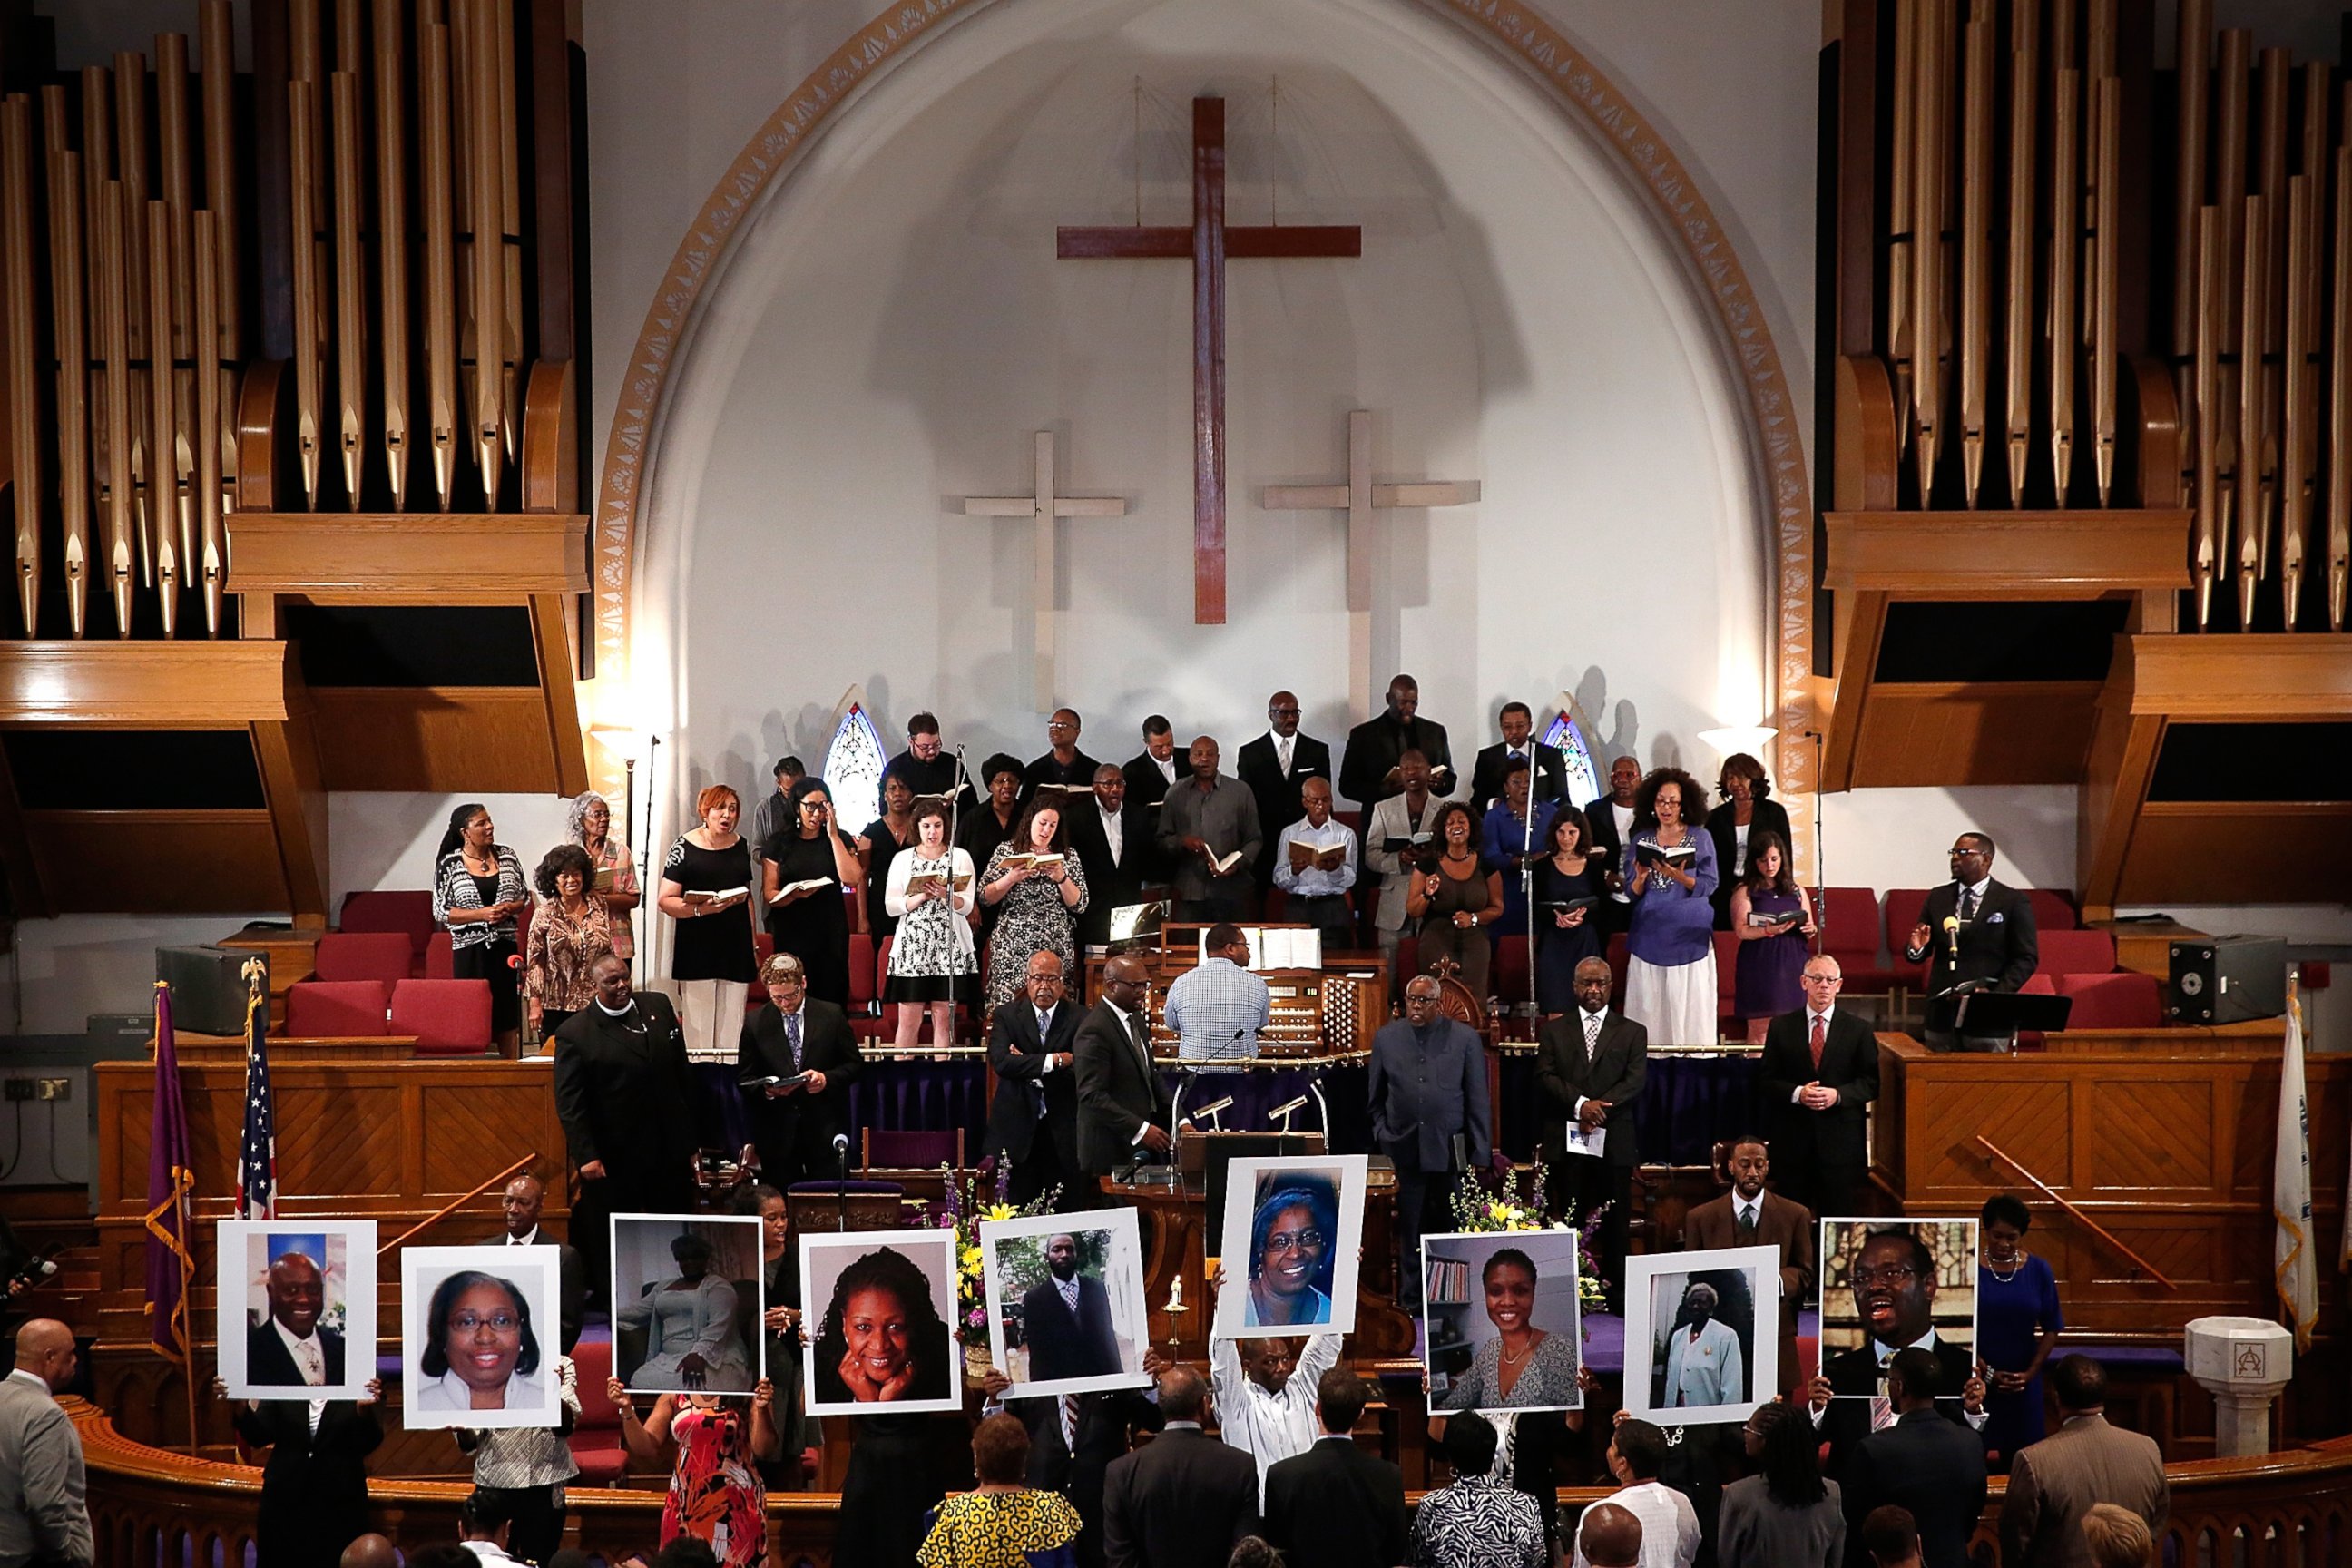 PHOTO: Photographs of the nine victims killed at the Emanuel African Methodist Episcopal Church in Charleston, S.C. are held up by congregants during a prayer vigil at the the Metropolitan AME Church June 19, 2015 in Washington, DC.